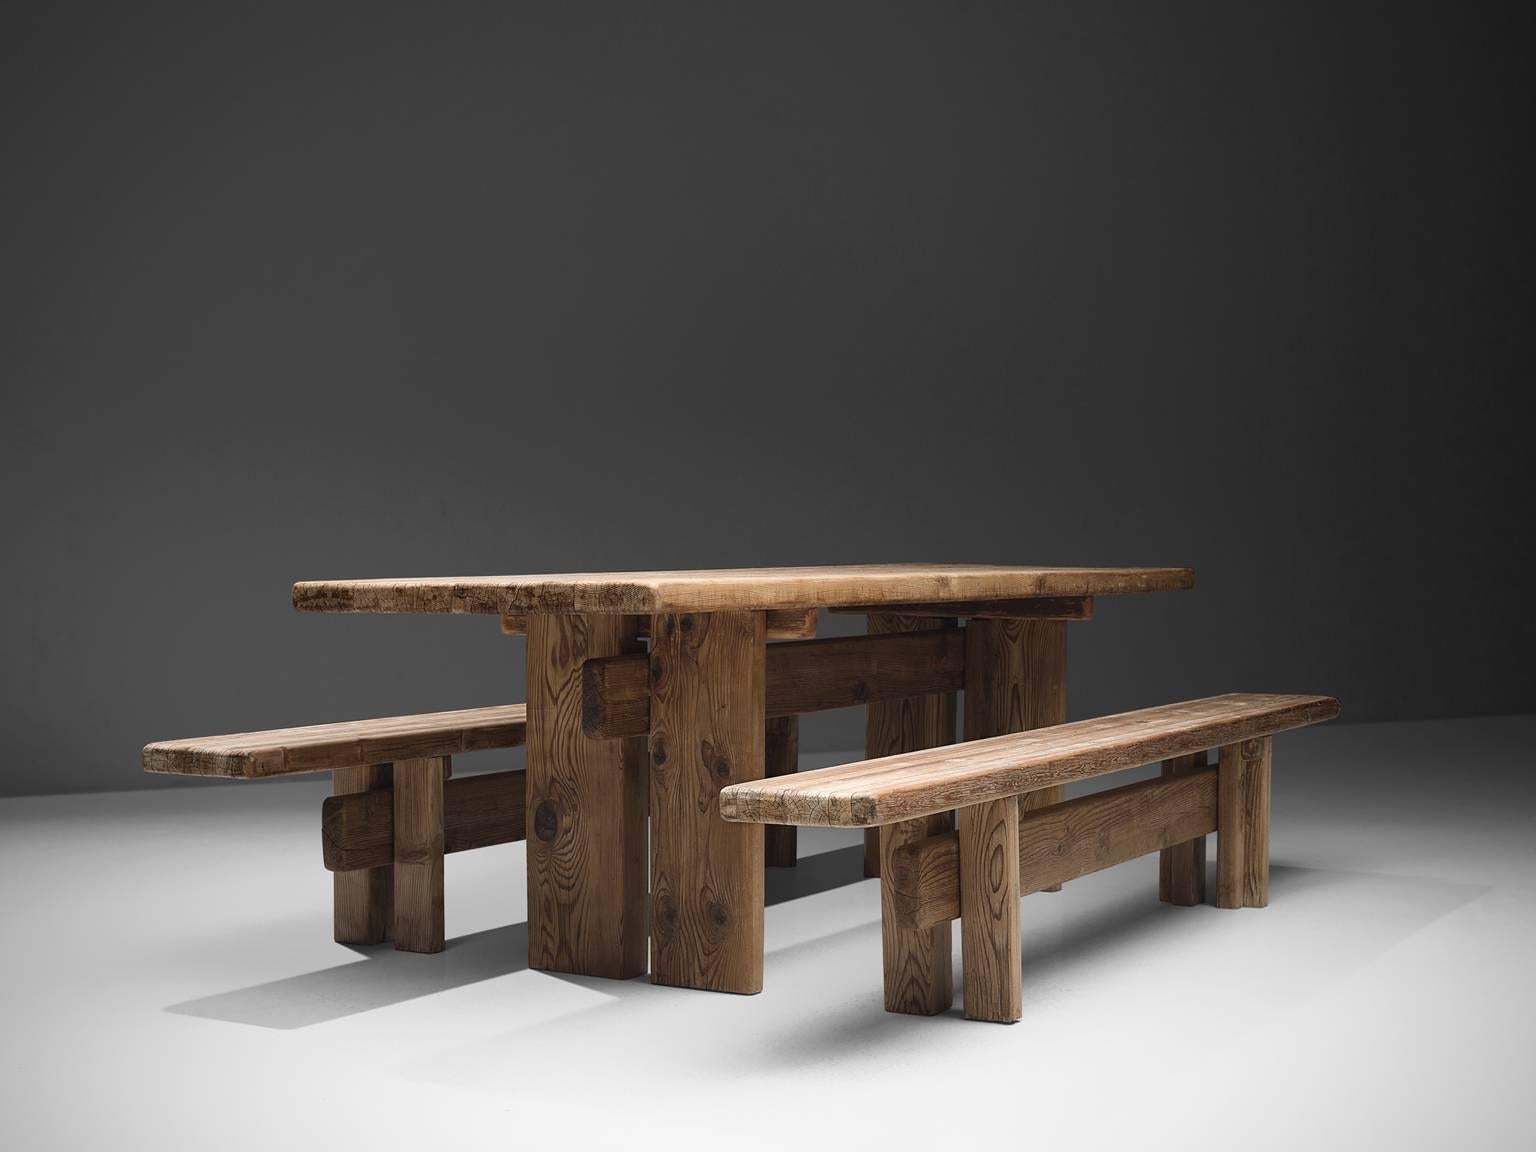 Dining set in pine wood, France, circa 1950. 

These pine wooden benches are robust and architectural in their design. The bulky benches and matching table are made of beautiful pine wood which developed a nice, rustic patina through age and use.